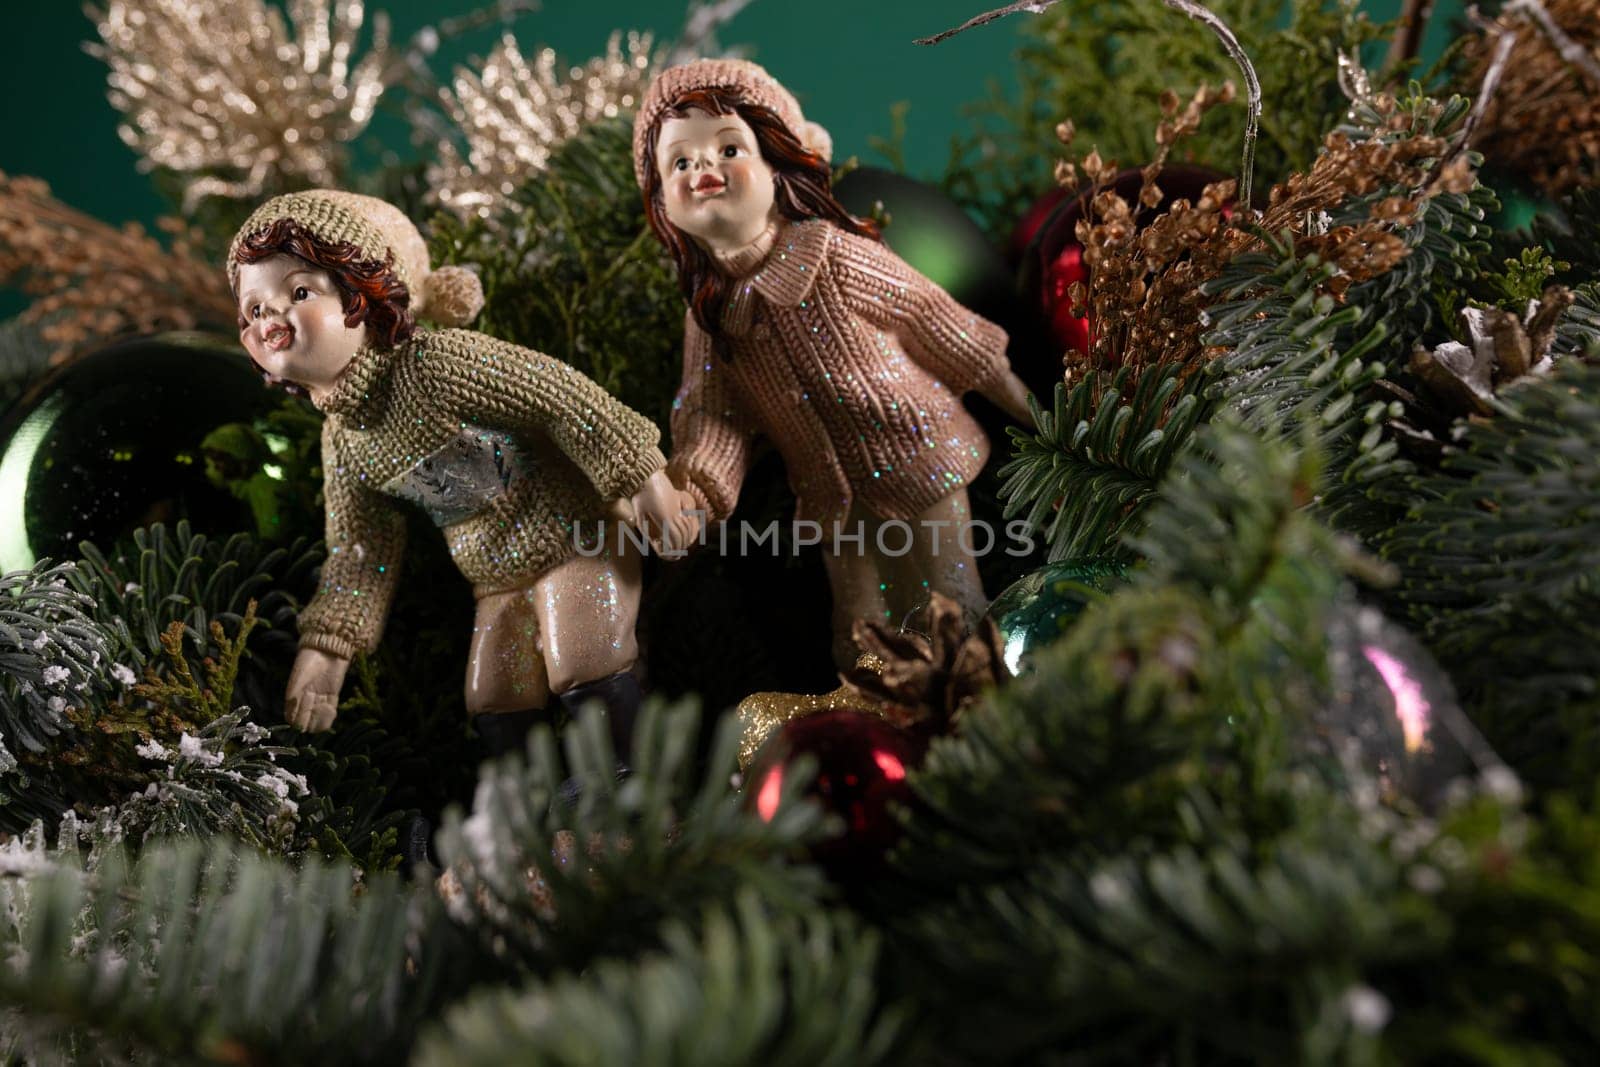 Two small figurines are perched on top of a festive Christmas tree. They are carefully positioned amidst the colorful ornaments and twinkling lights, adding a whimsical touch to the holiday decor.